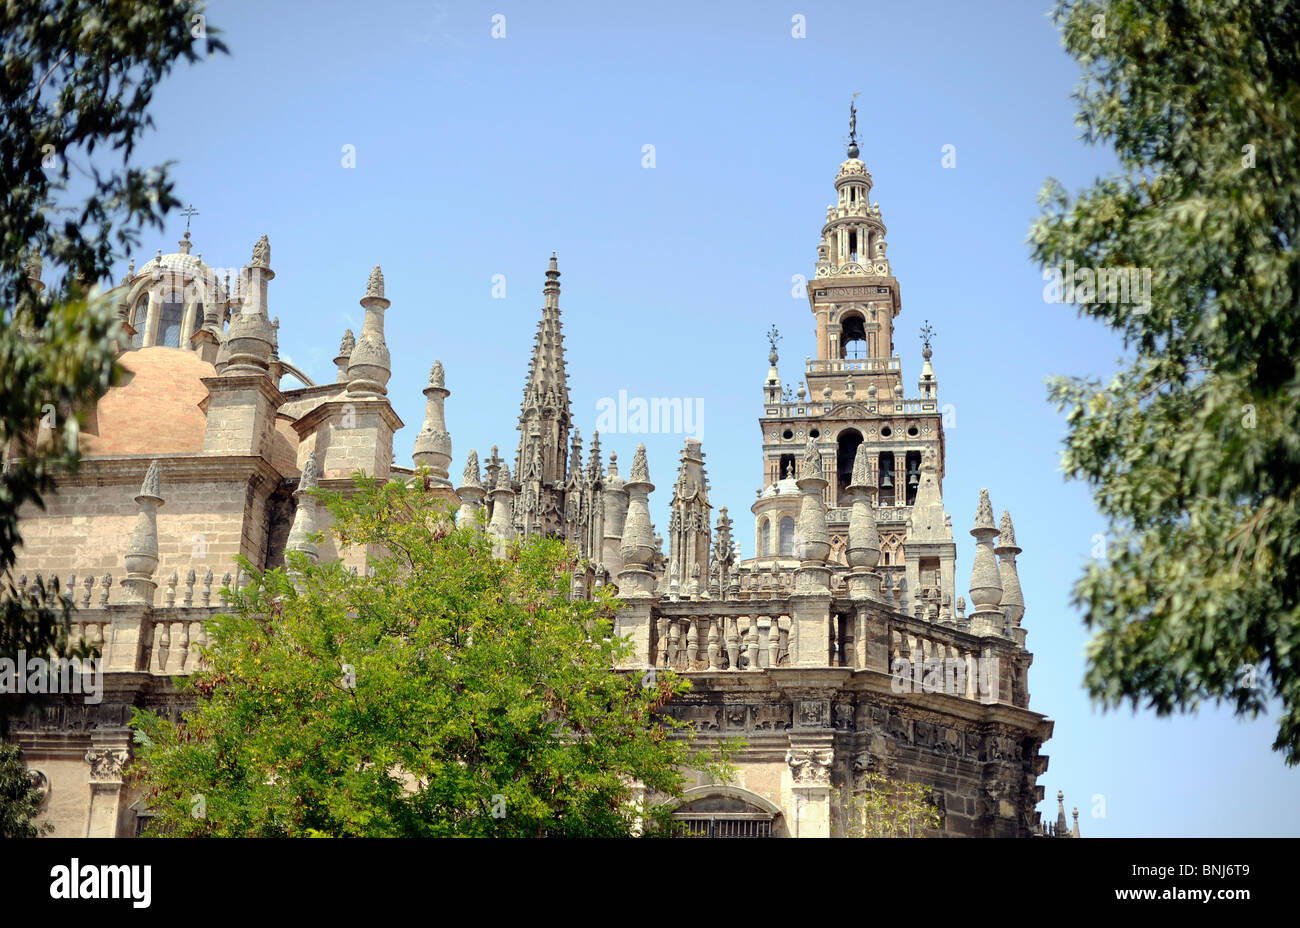 Kathedrale von Sevilla, cathedral of Seville, Spain, Spanien, Andalusien, Andalisia Stock Photo